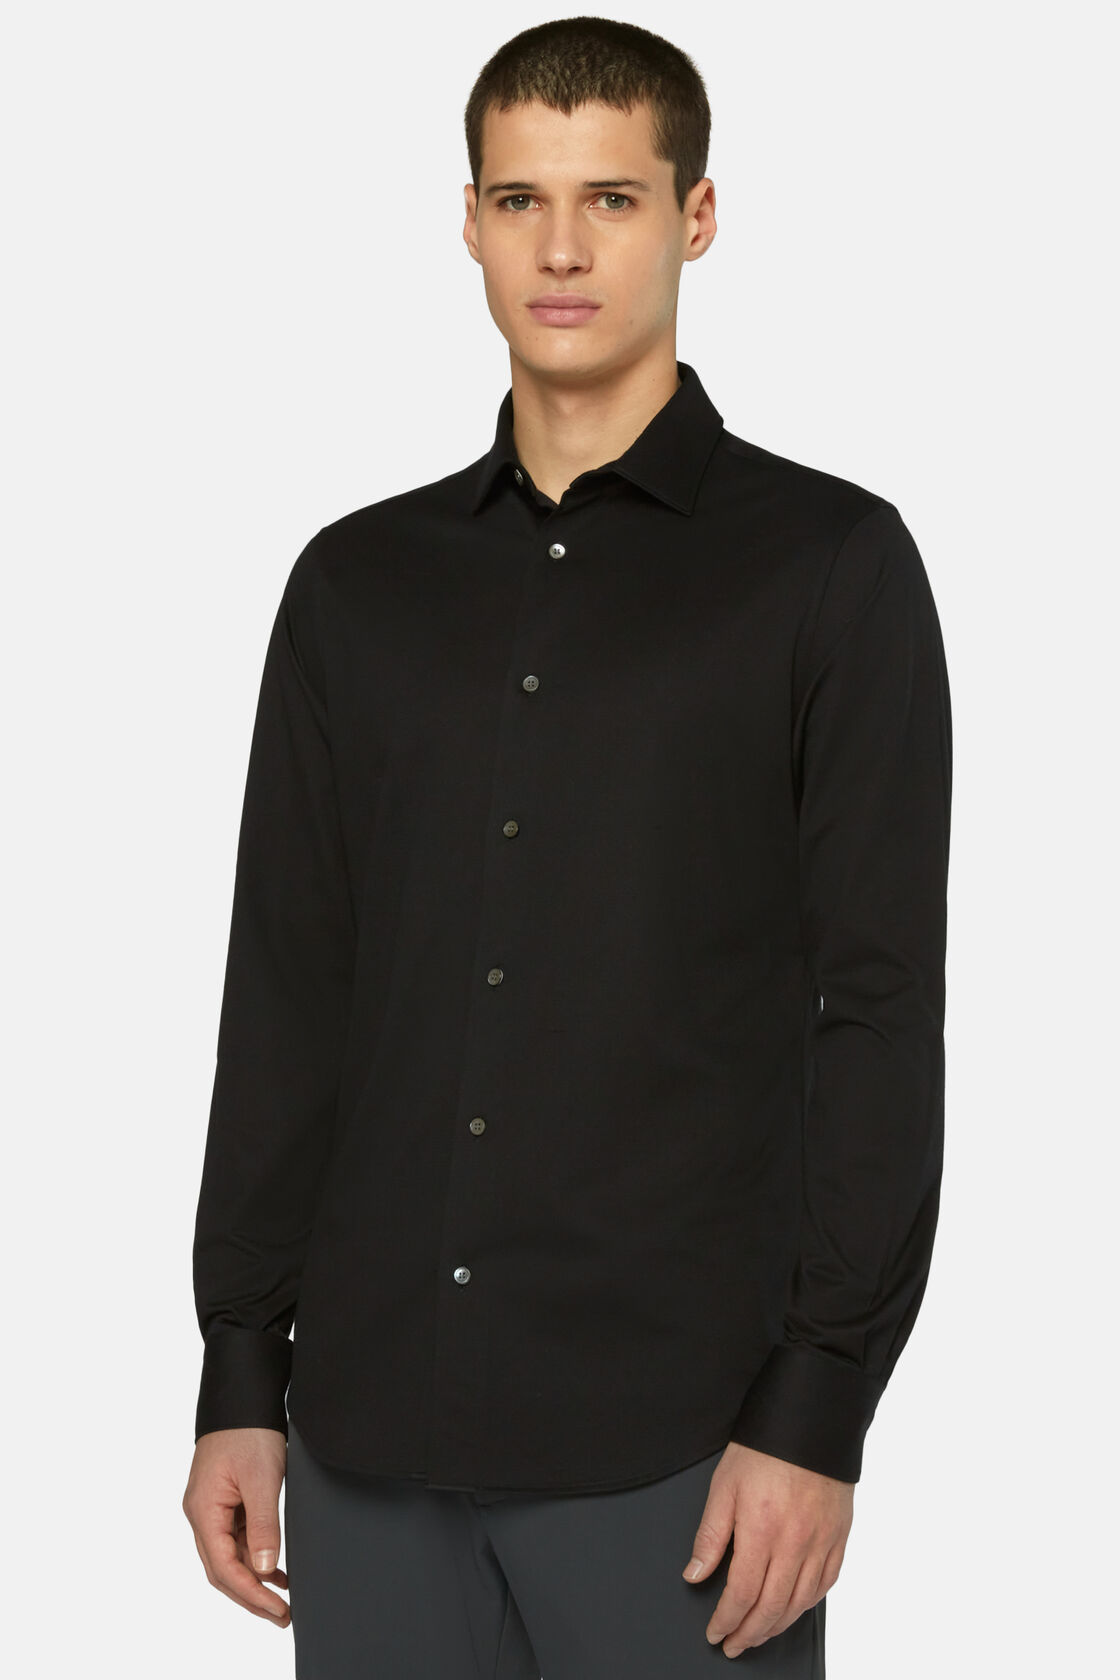 Slim Fit Black Shirt in Cotton and COOLMAX®, , hi-res